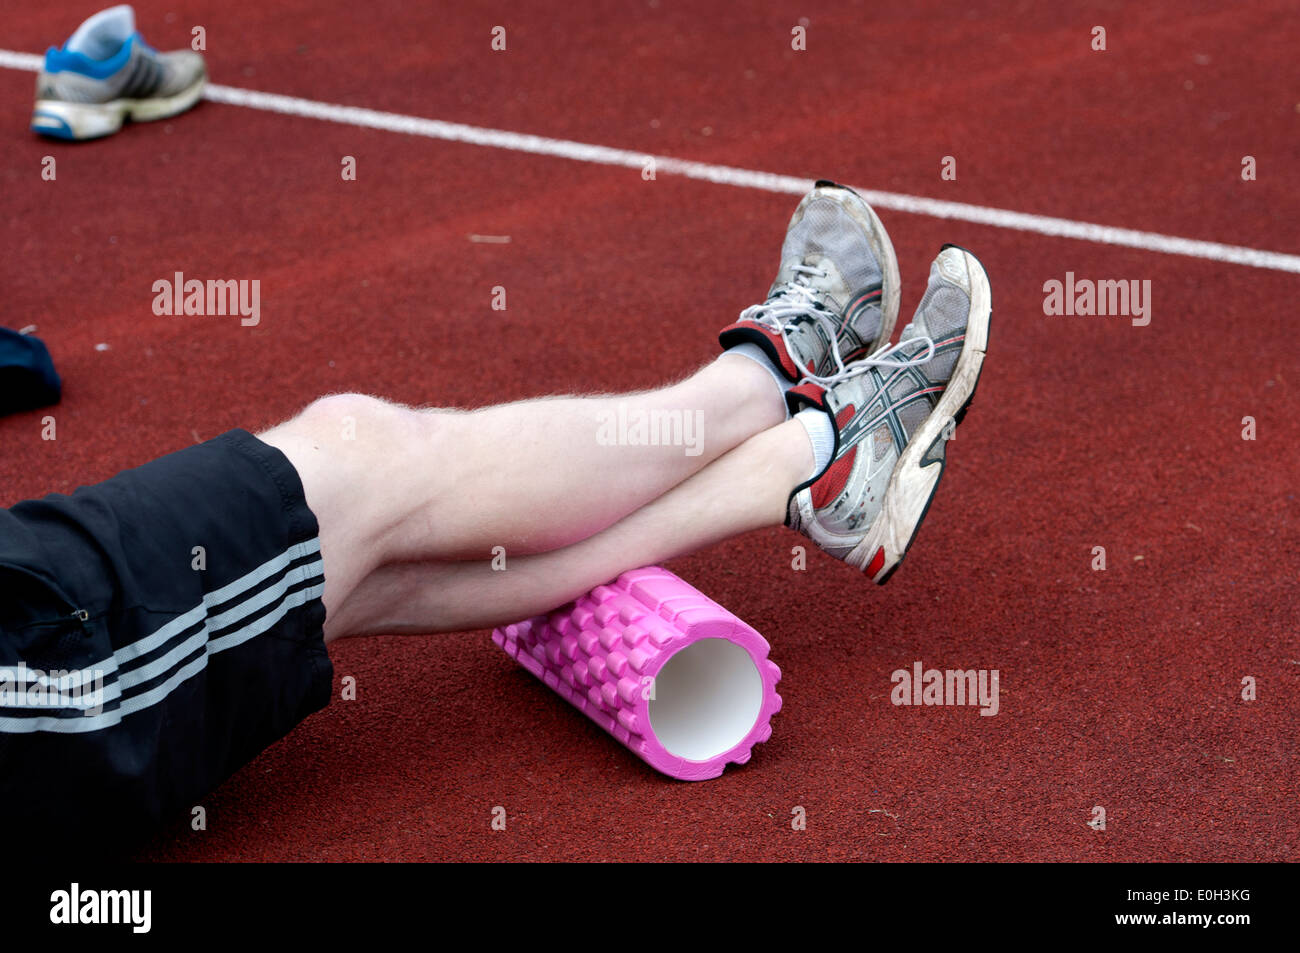 Athlete using foam roller for calf muscles Stock Photo